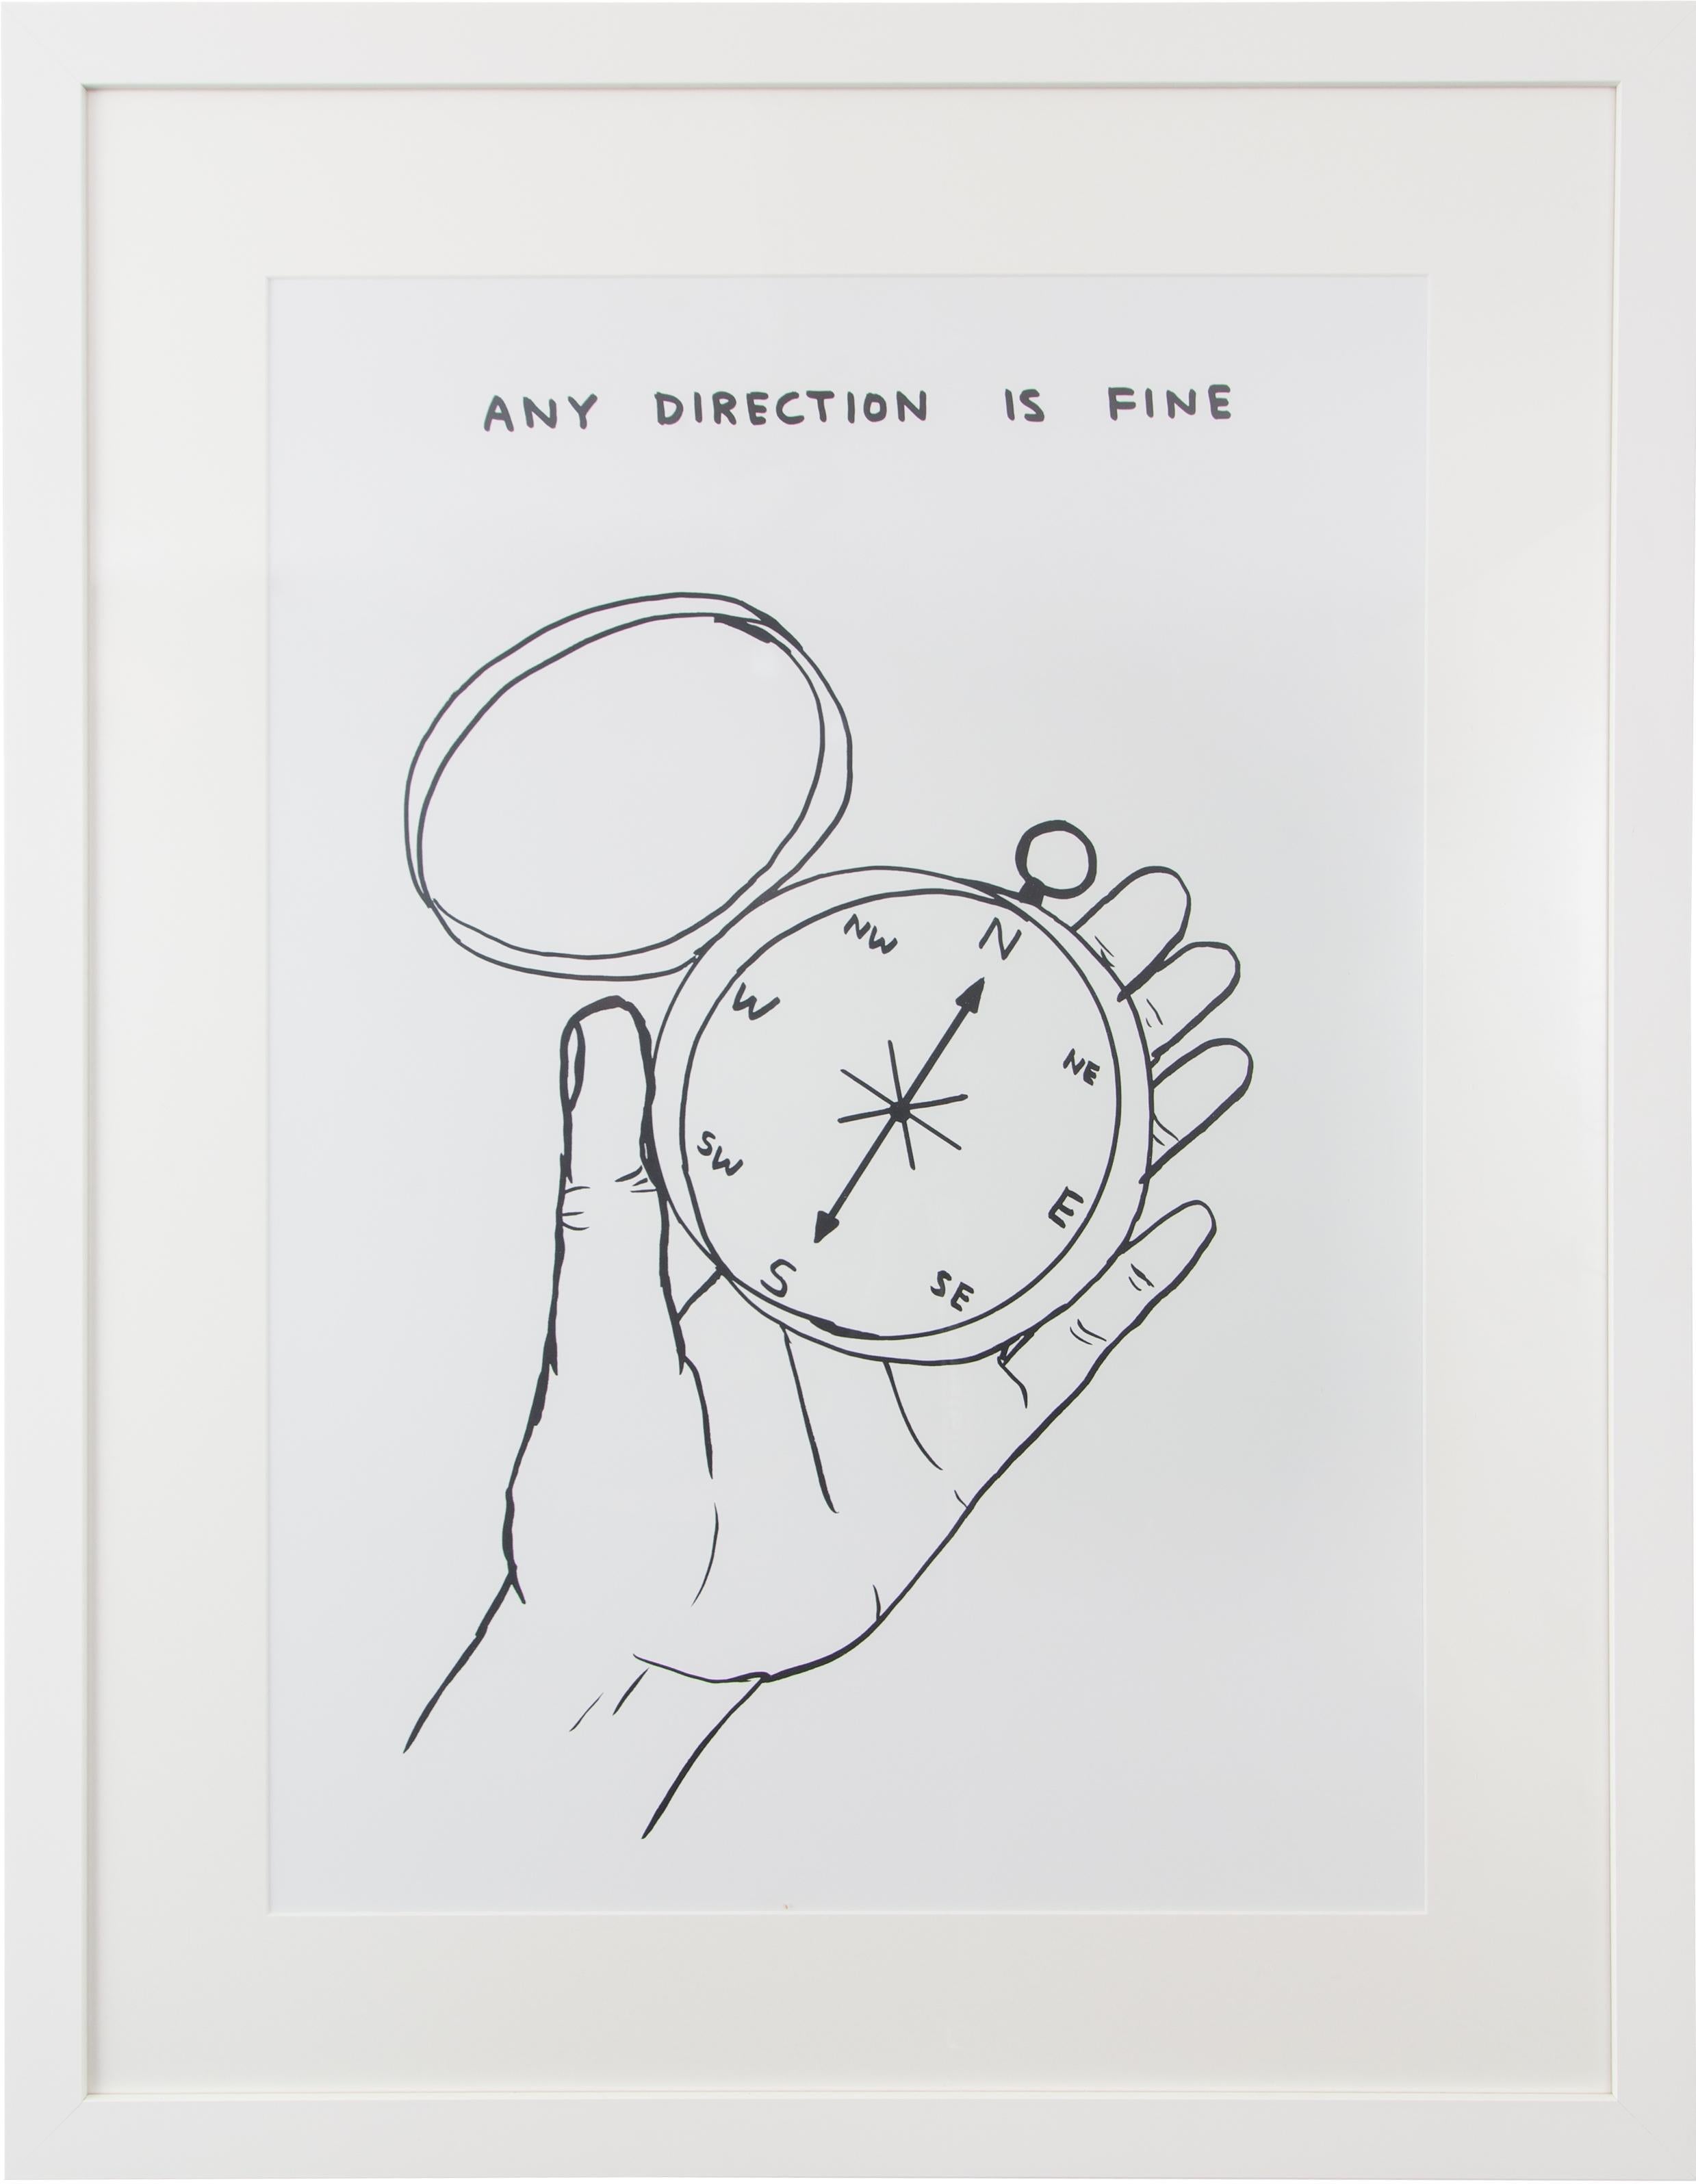 Any Direction Is Fine - Print by David Shrigley